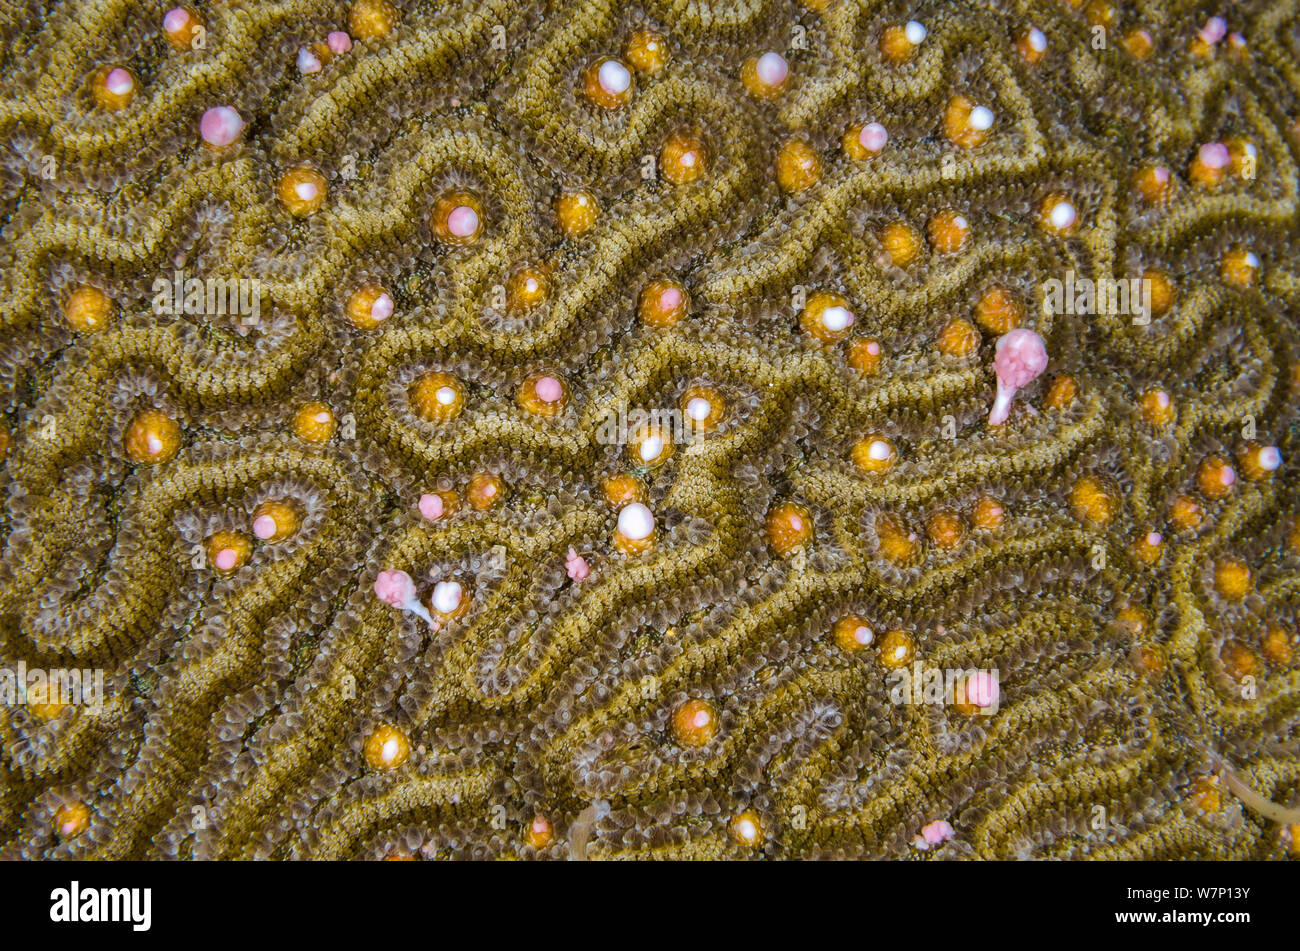 A Symmeterical brain coral (Diploria strigosa) spawning at night, releasing pink and white bundles of eggs and sperm from the polyps within its grooves, East End, Grand Cayman, Cayman Islands, British West Indies, Caribbean Sea. Stock Photo